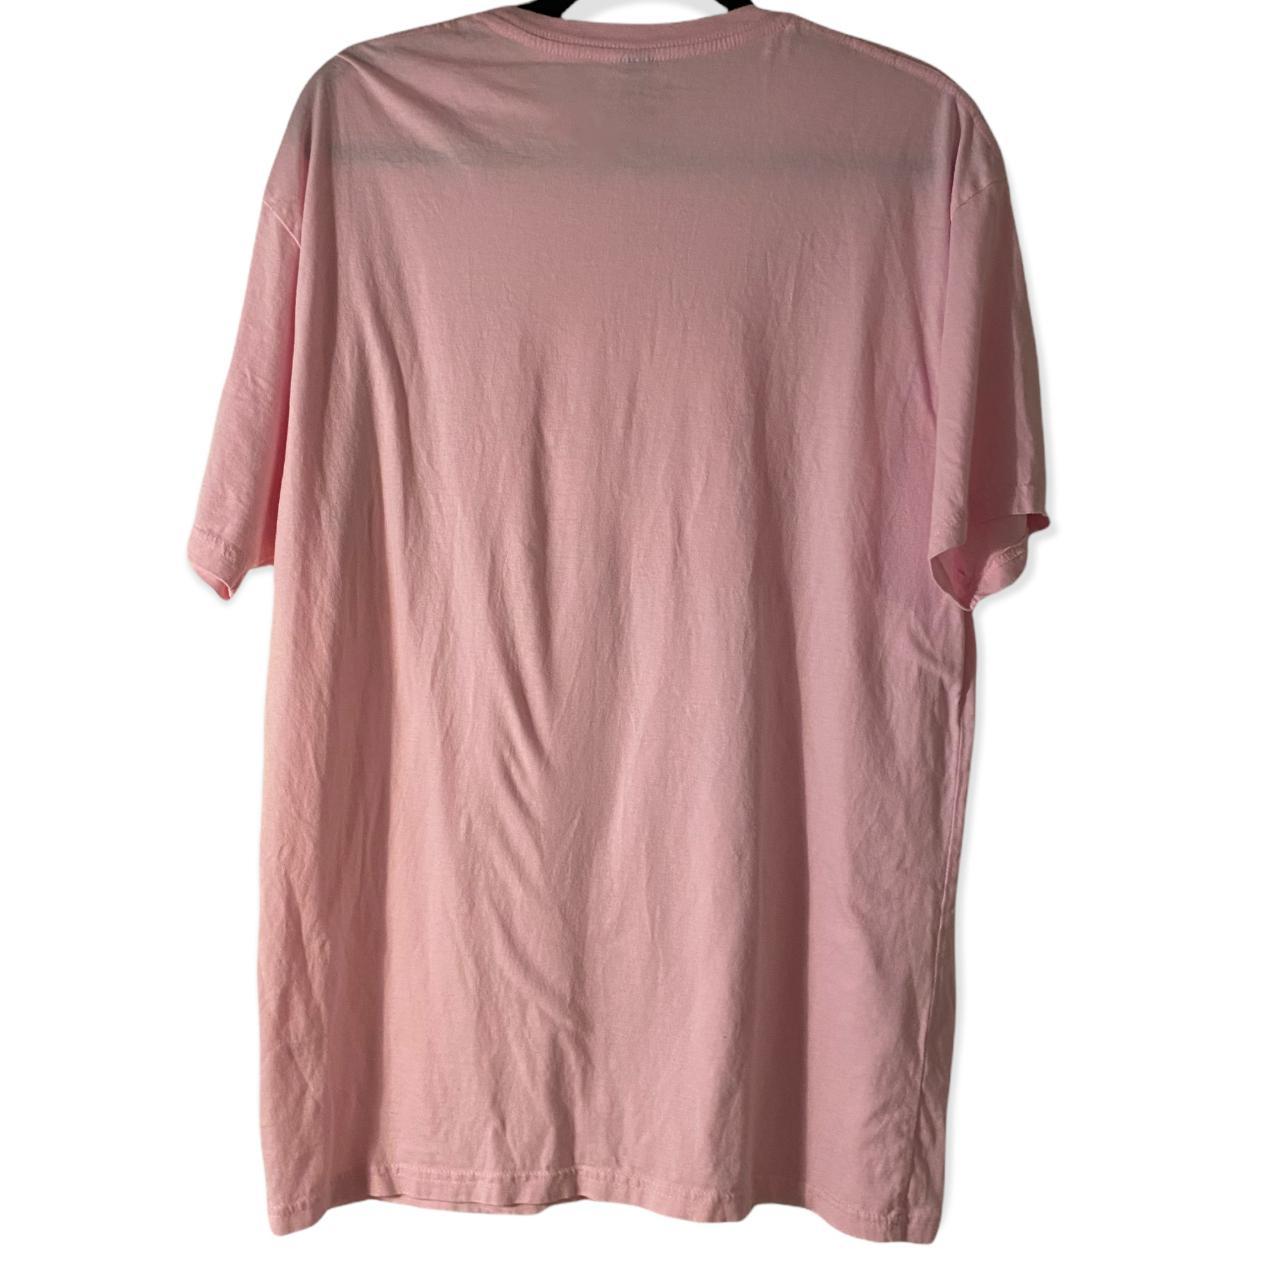 Product Image 2 - Light Pink Tee, size large,